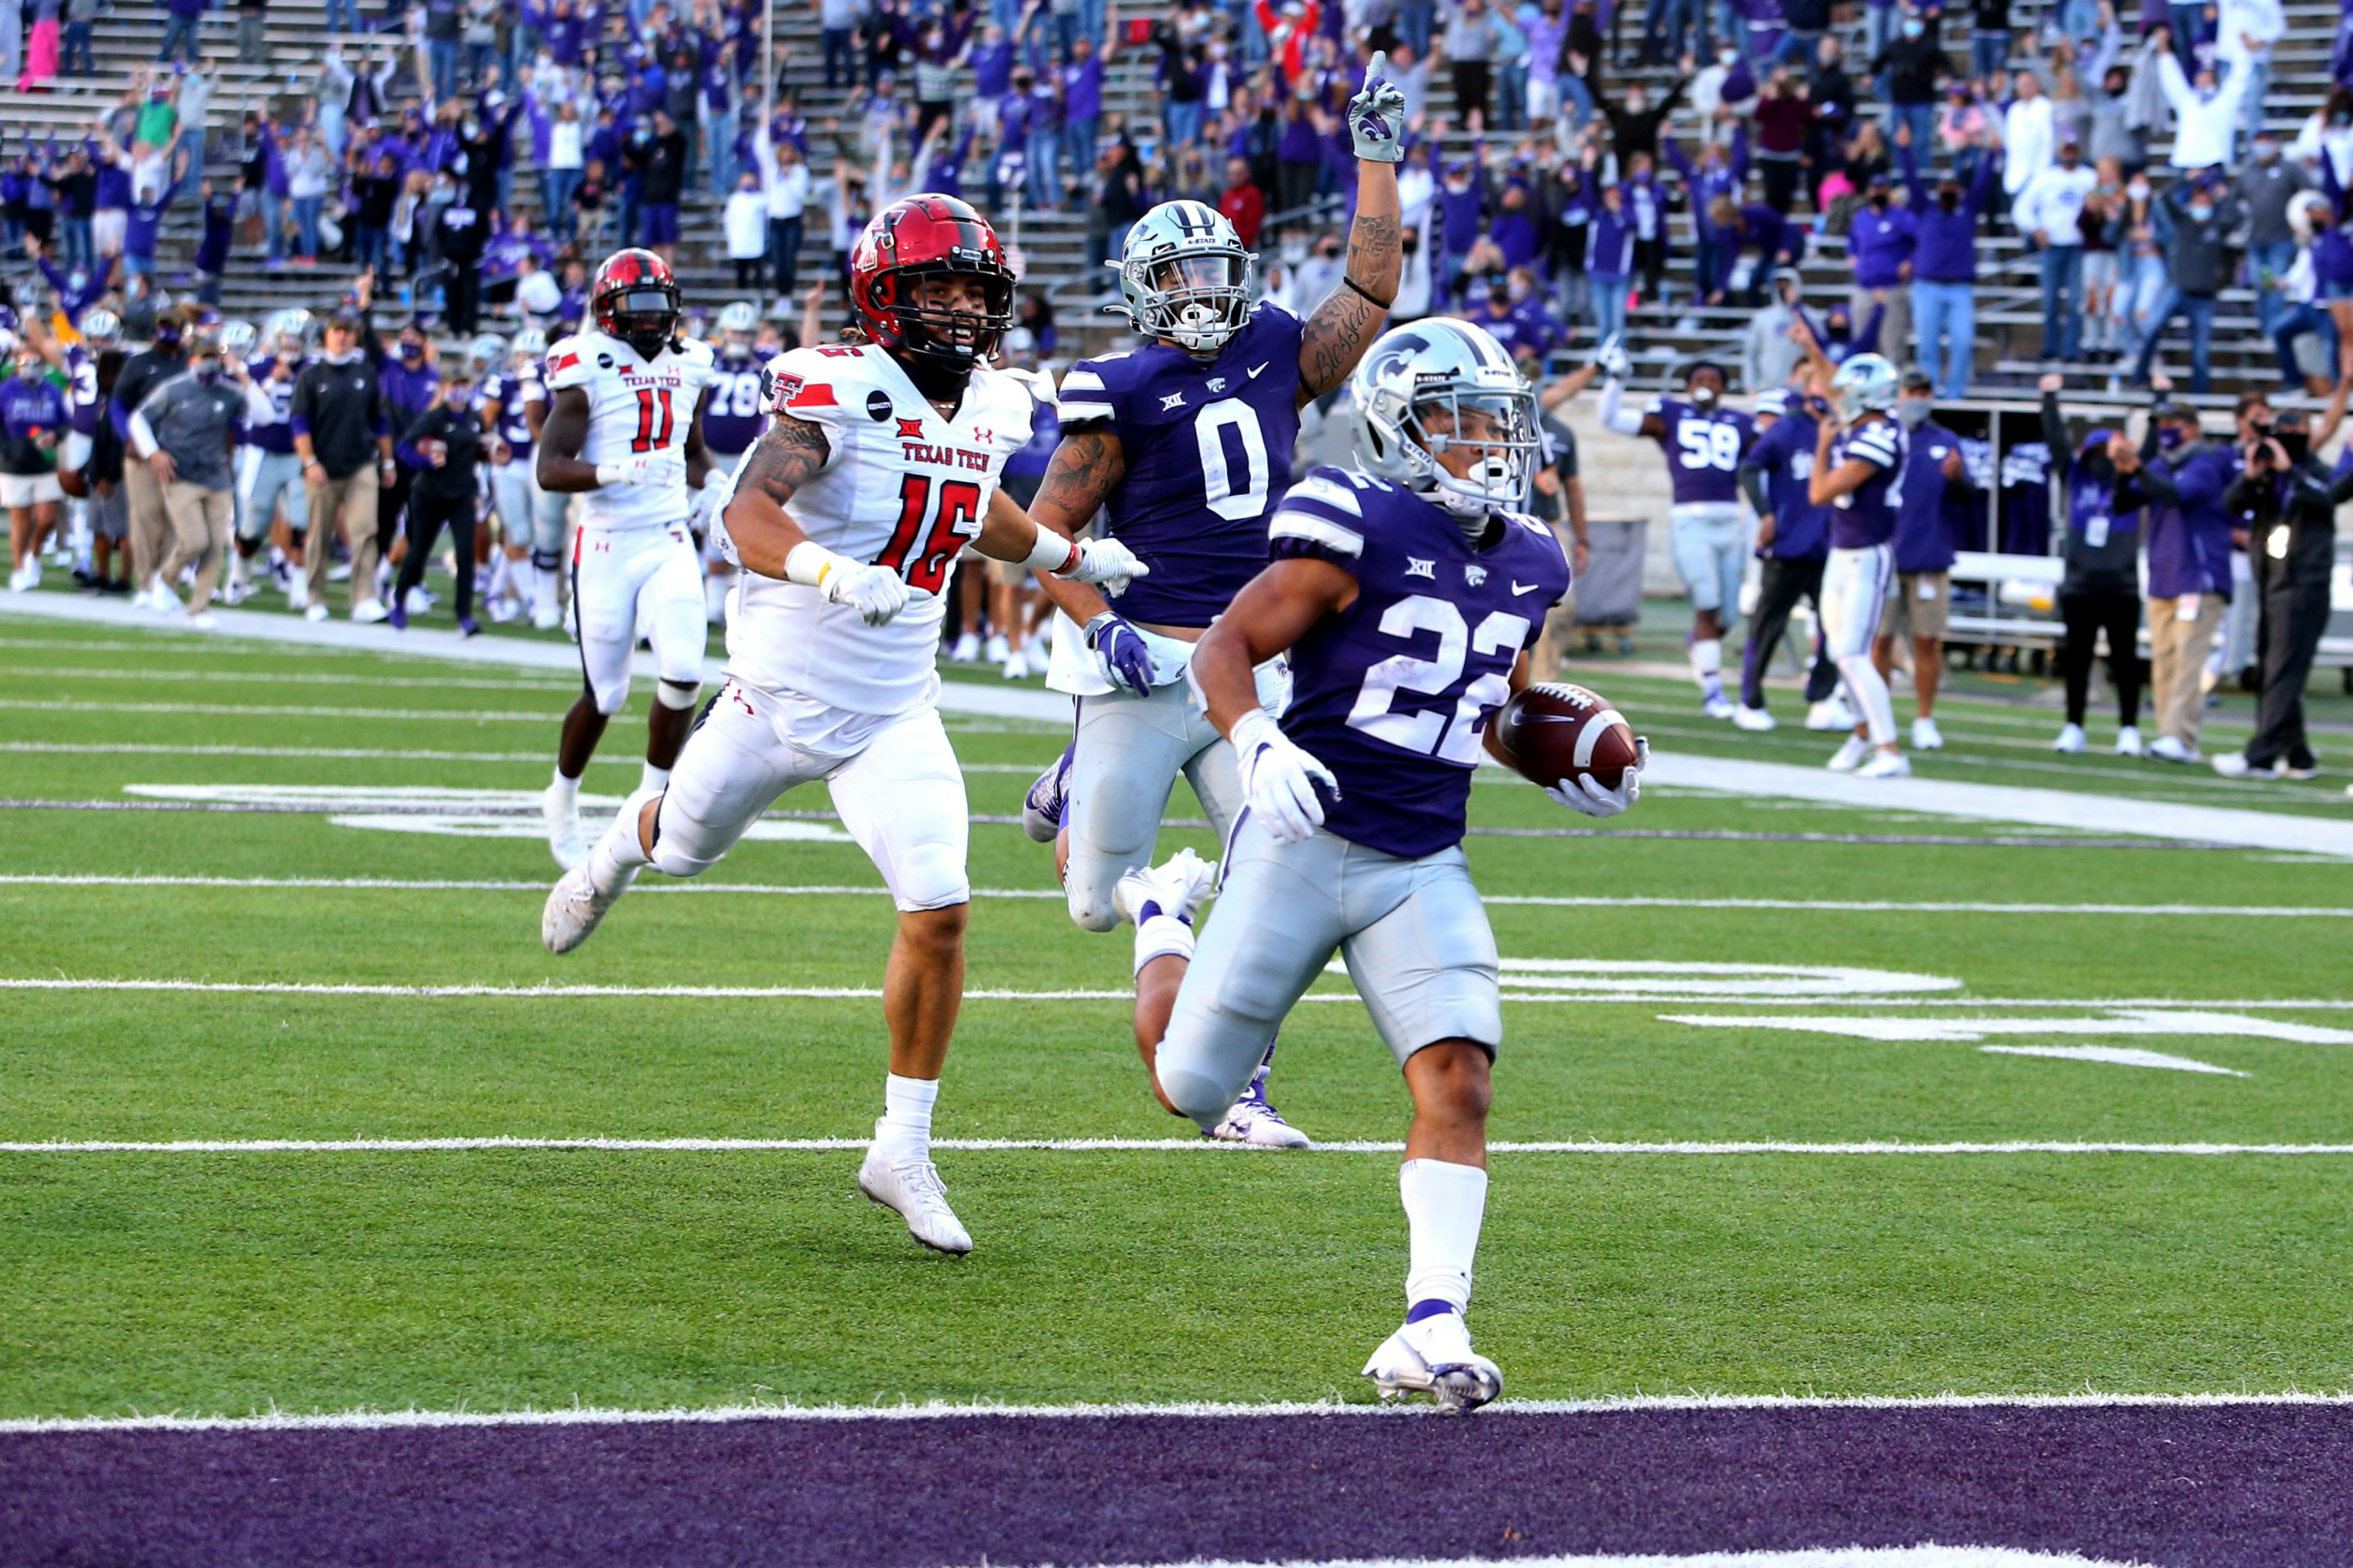 Kansas State Football 3 takeaways from clutch win over Texas Tech Page 3